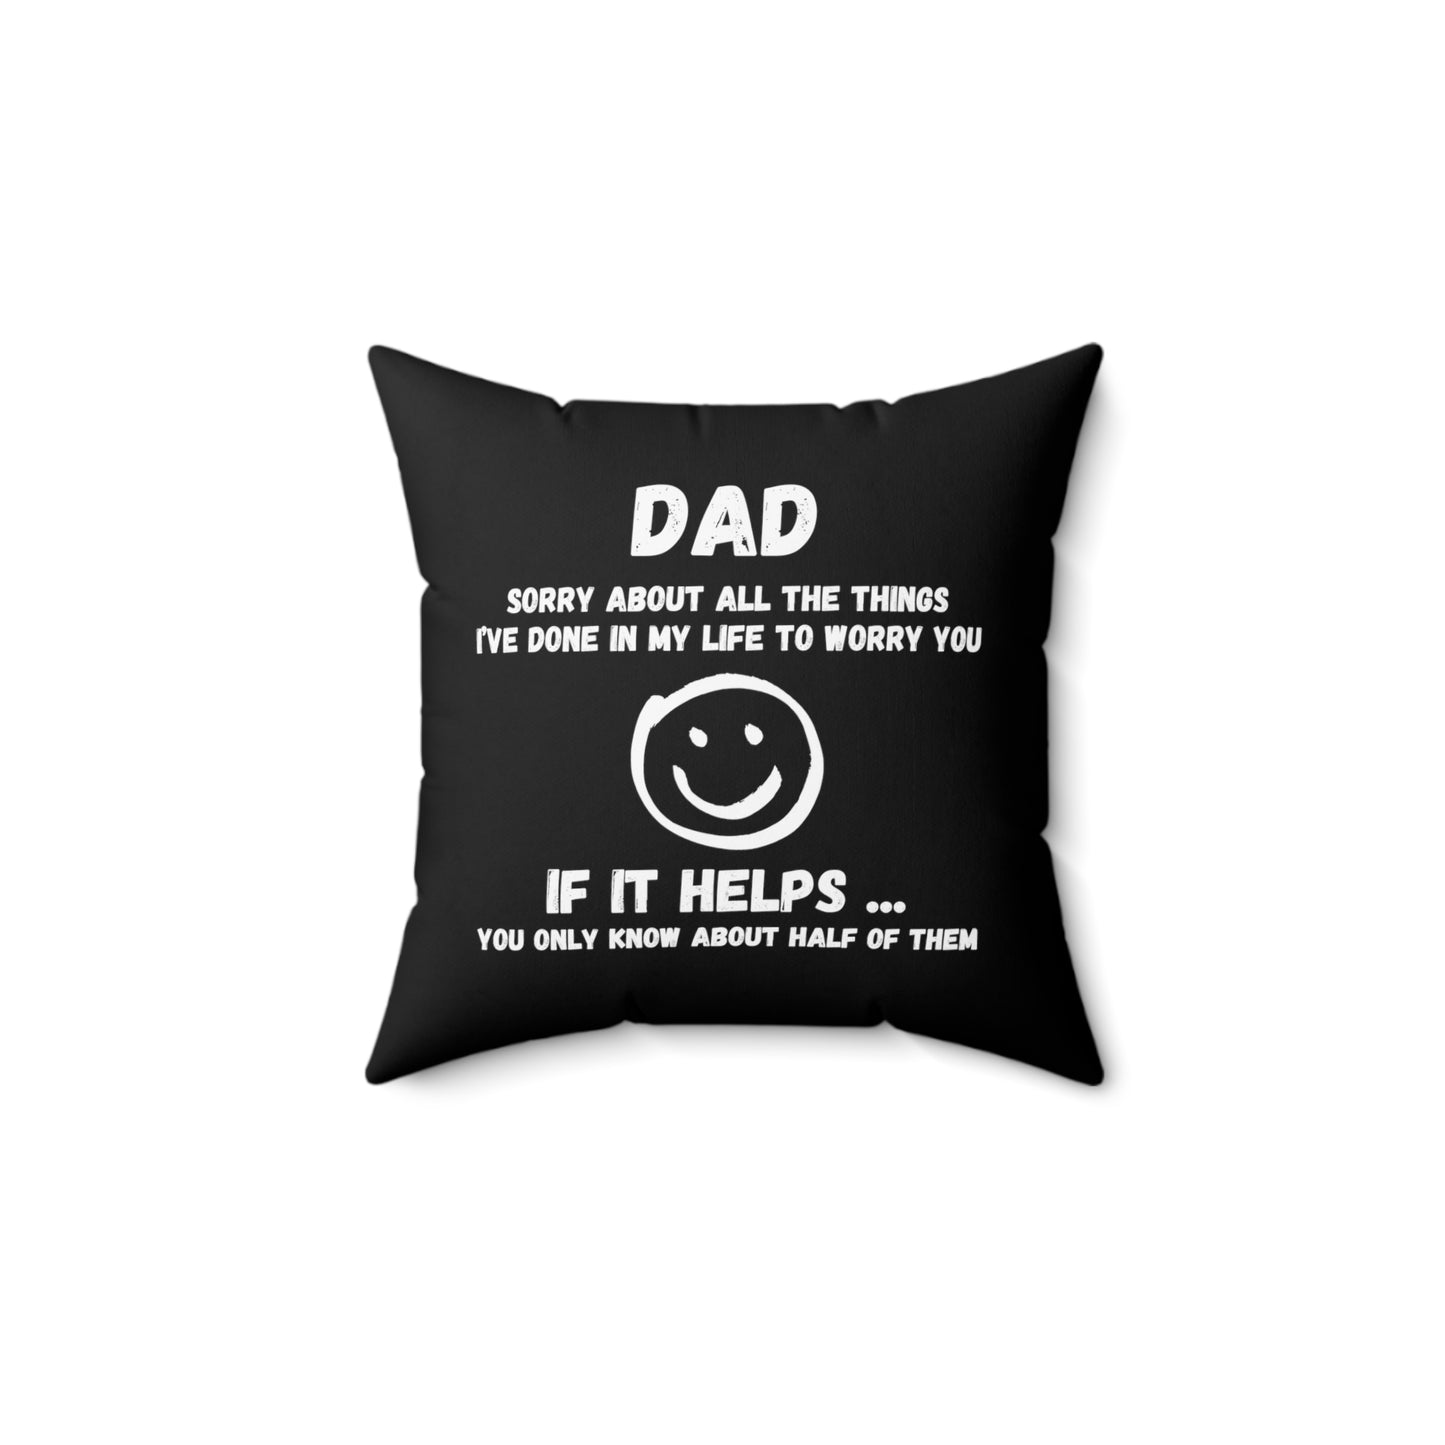 Funny inside joke pillow for dads. A great father's day, birthday or Christmas gift from kids. Black pillow with white design "Dad, sorry about all the things I've done in my life to worry you. If it helps, you only know about half of them."